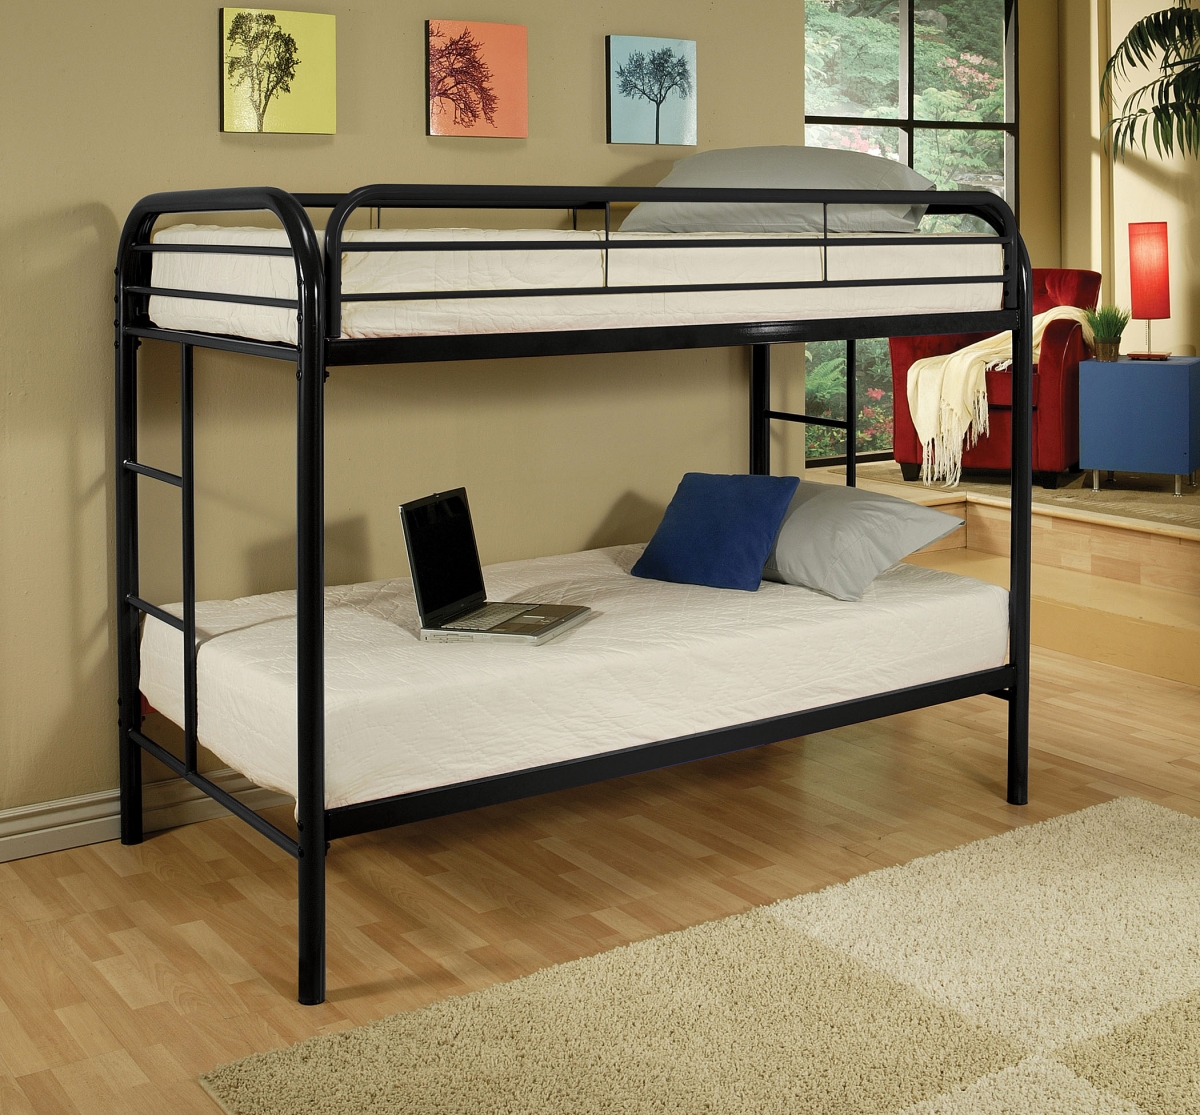 Picture of Home Roots Furniture 285197 60 x 78 x 41 in. Metal Tube Twin Bunk Bed - Black